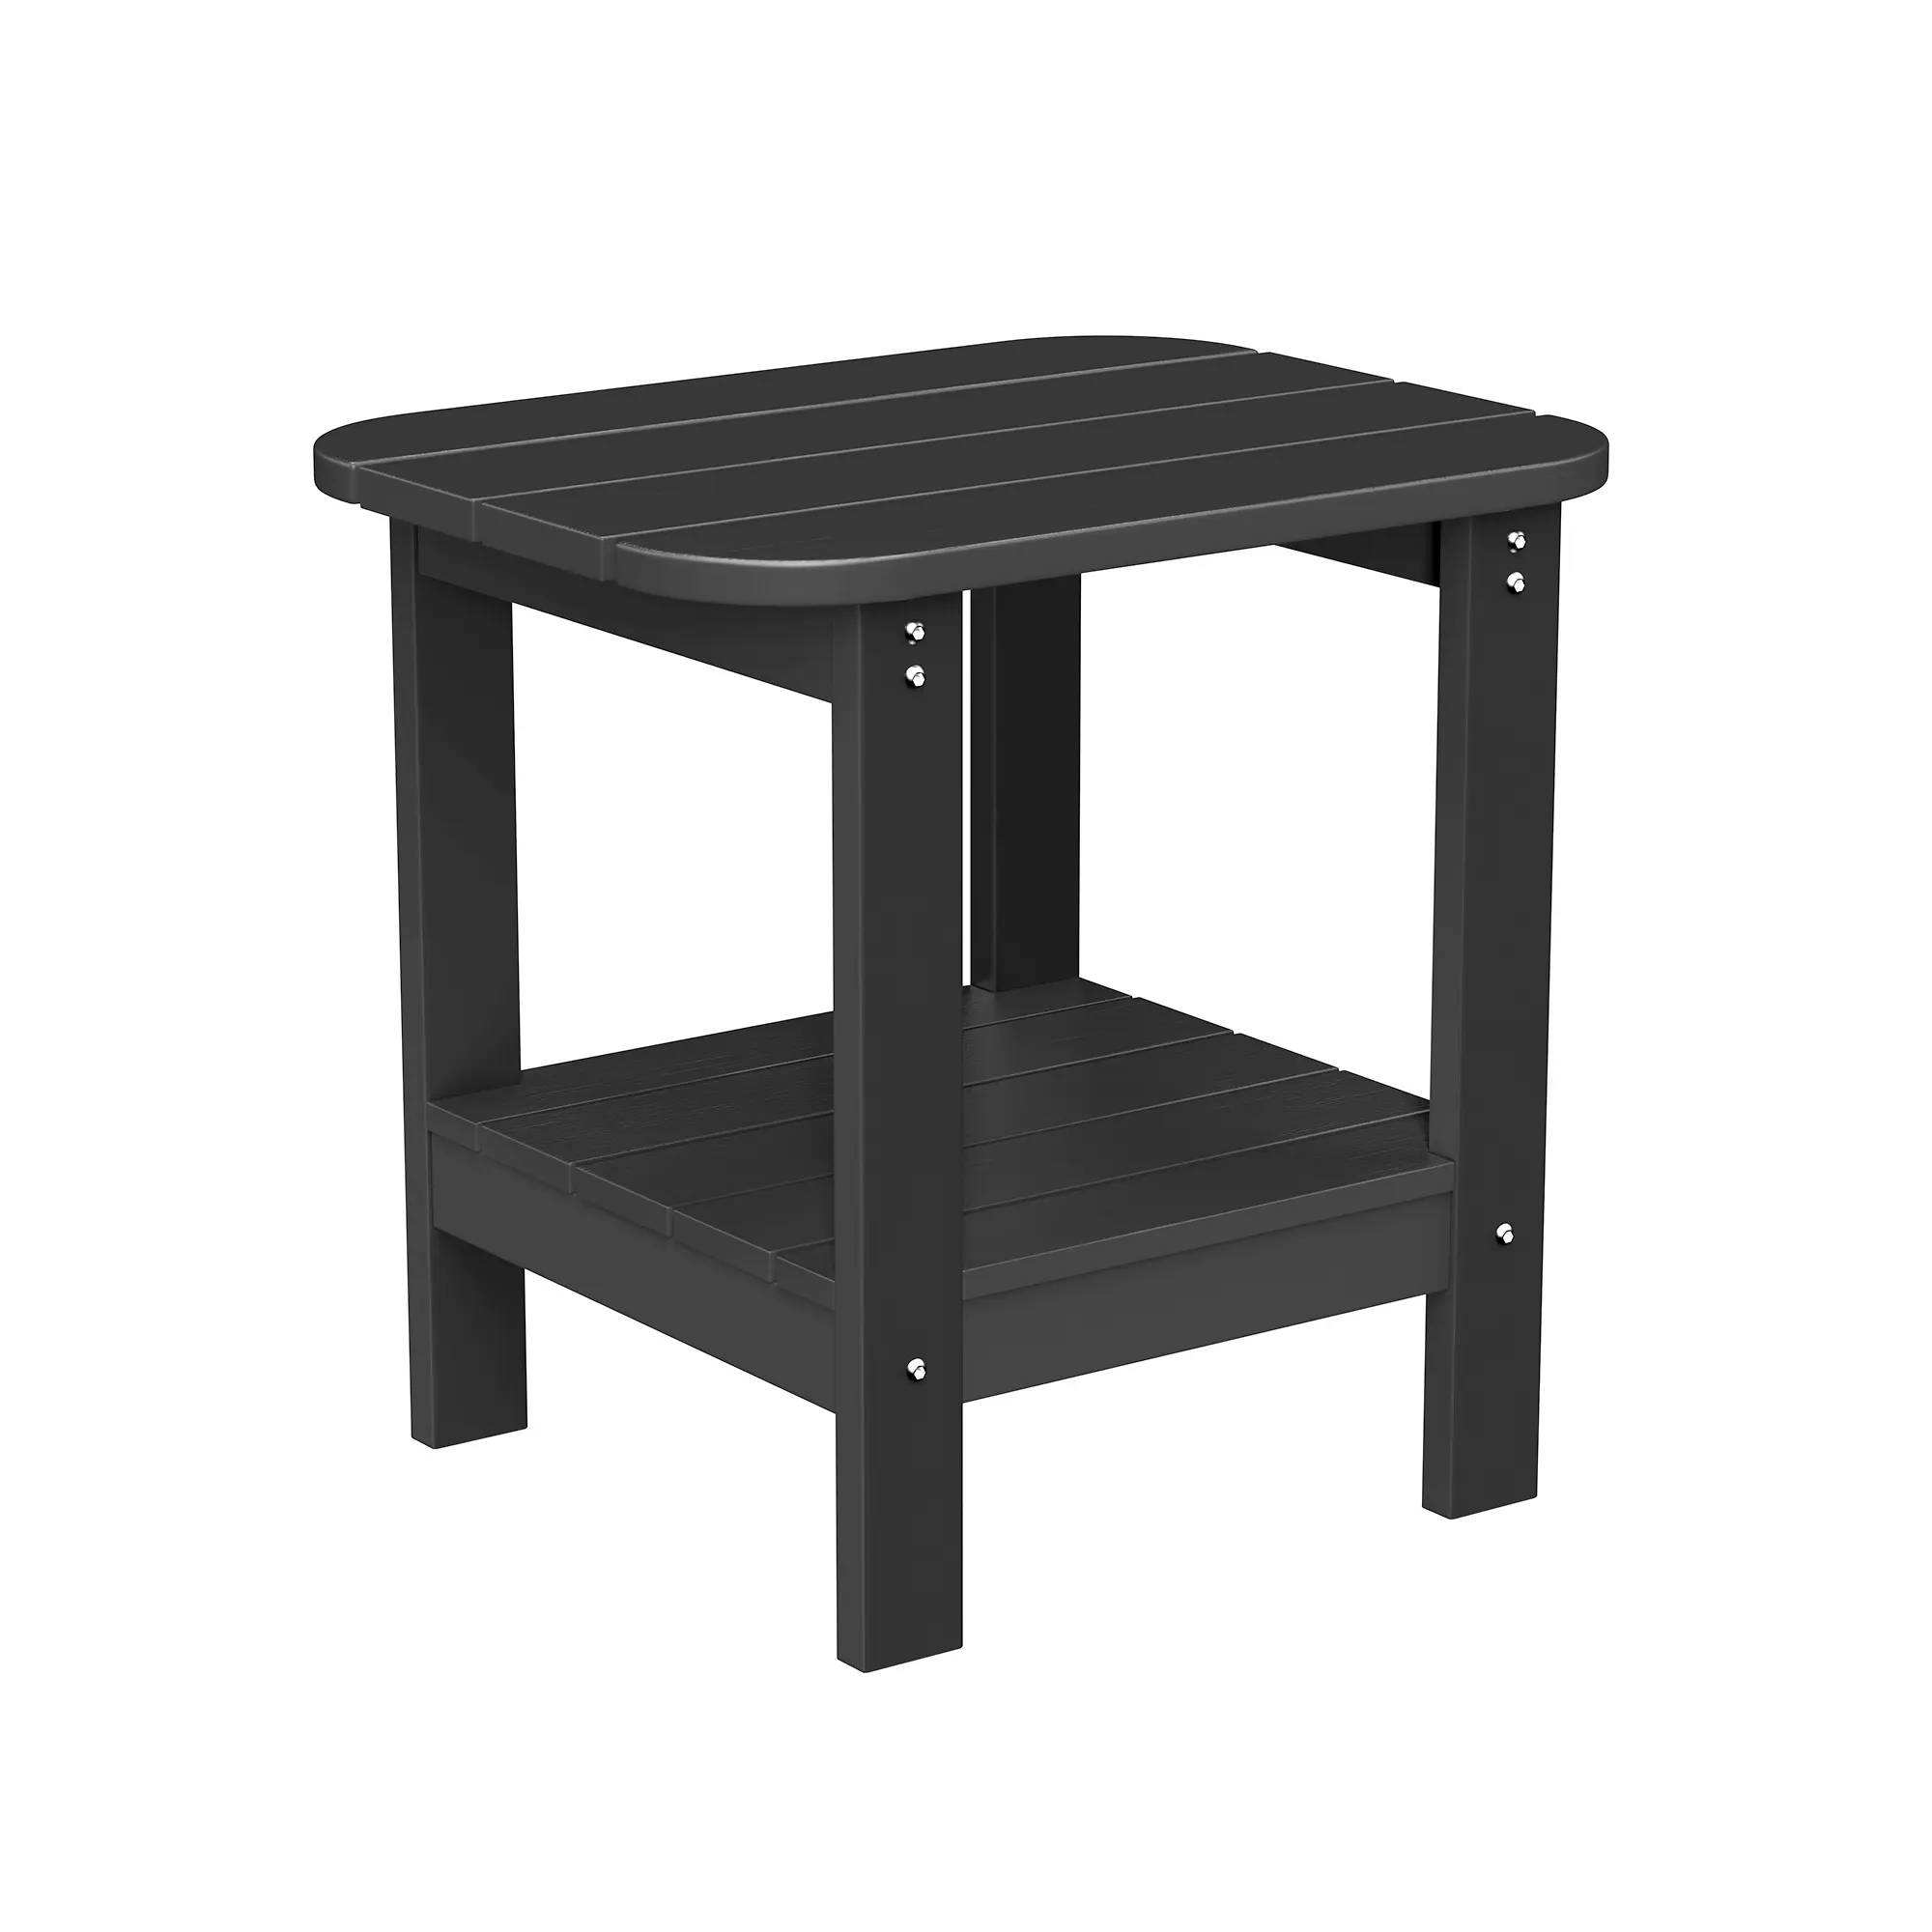 Double Decker Outdoor Side Table With Safe Curved Edge Design